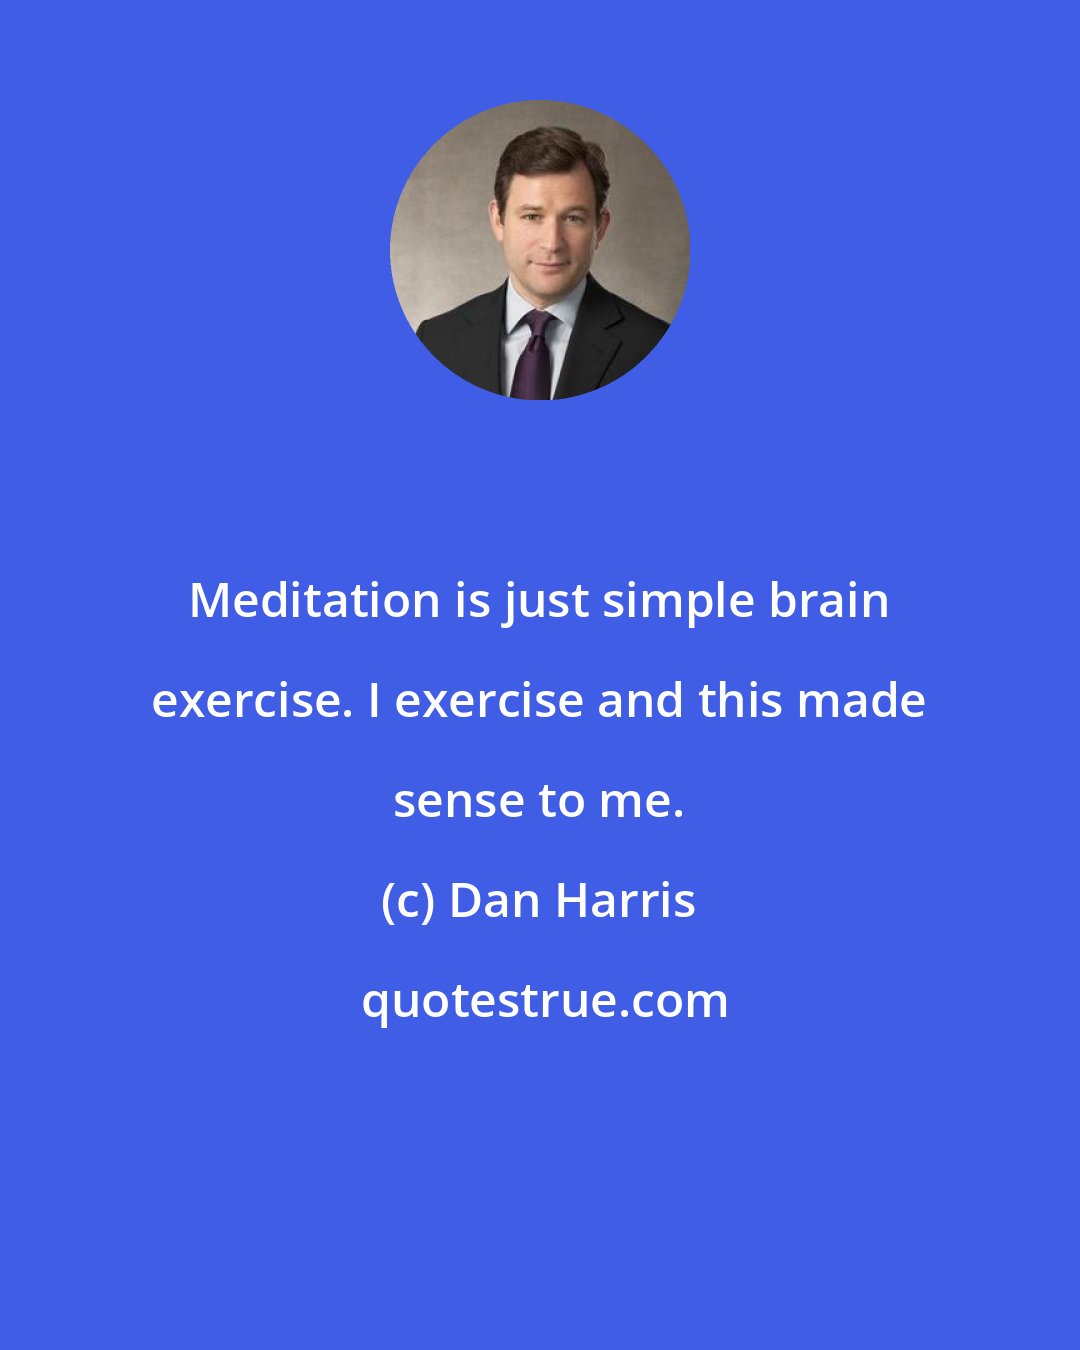 Dan Harris: Meditation is just simple brain exercise. I exercise and this made sense to me.